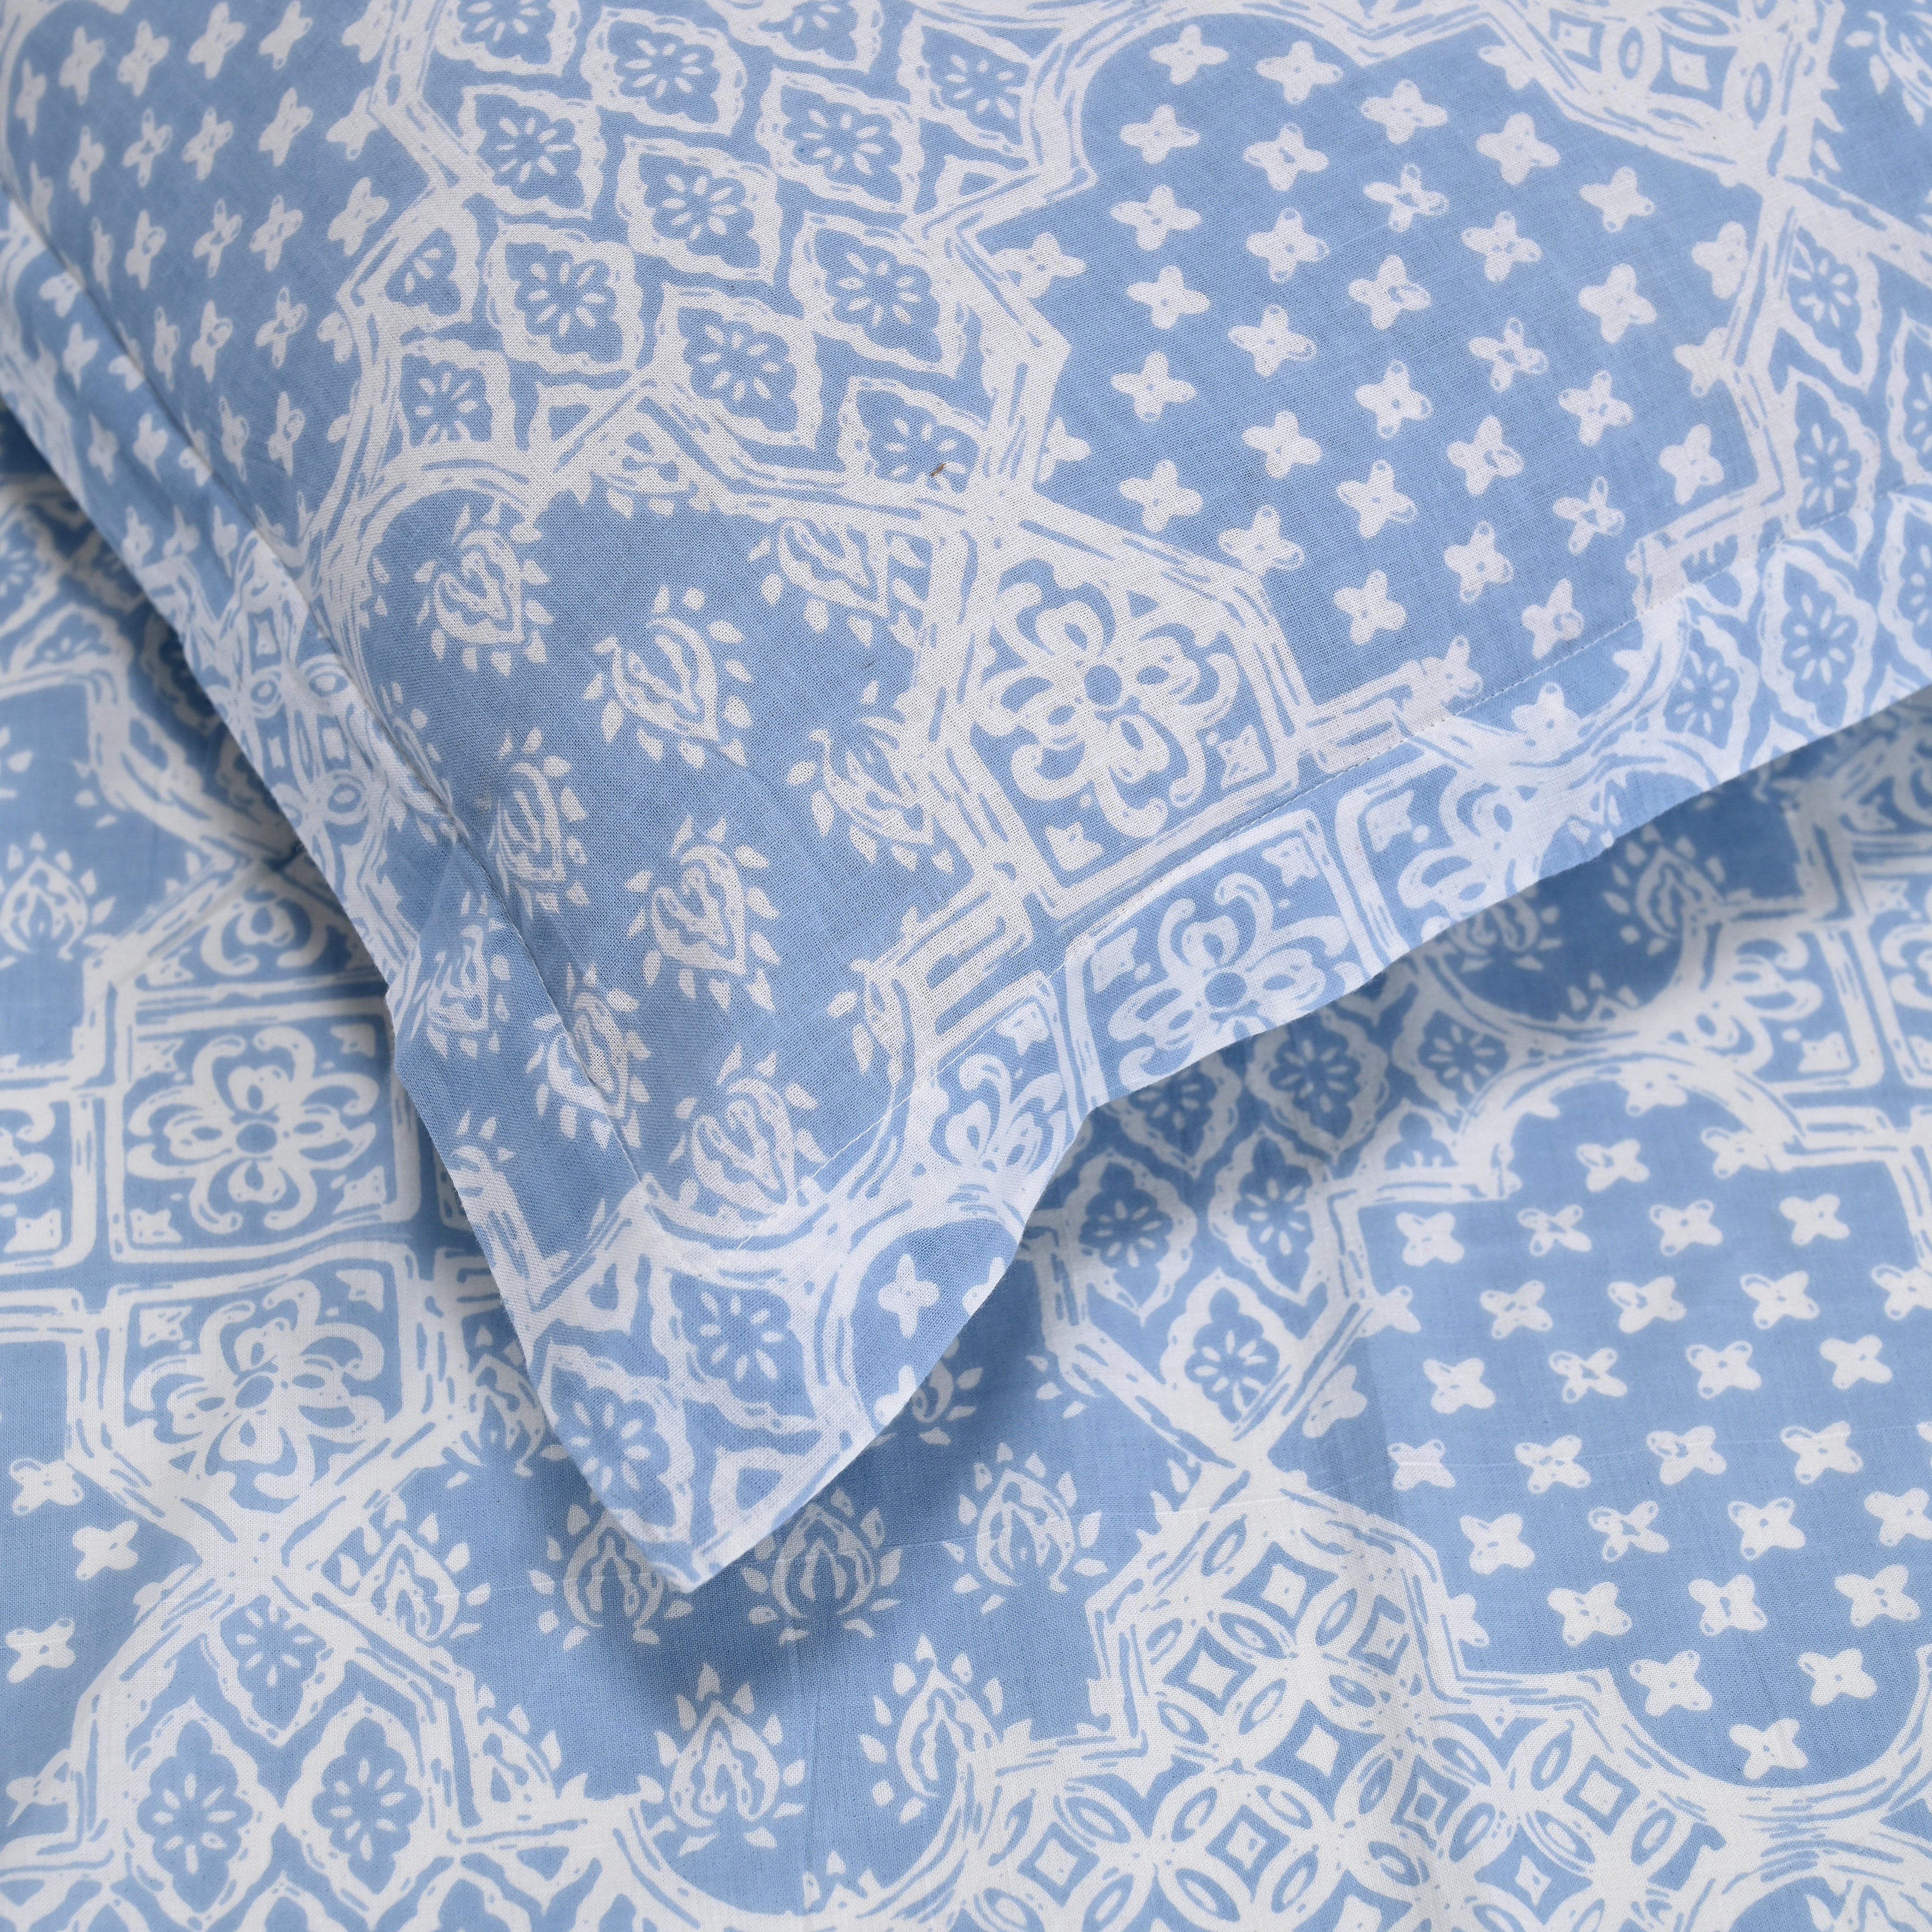 Moroccan Blue Printed Bed Sheet with set of 2 shams